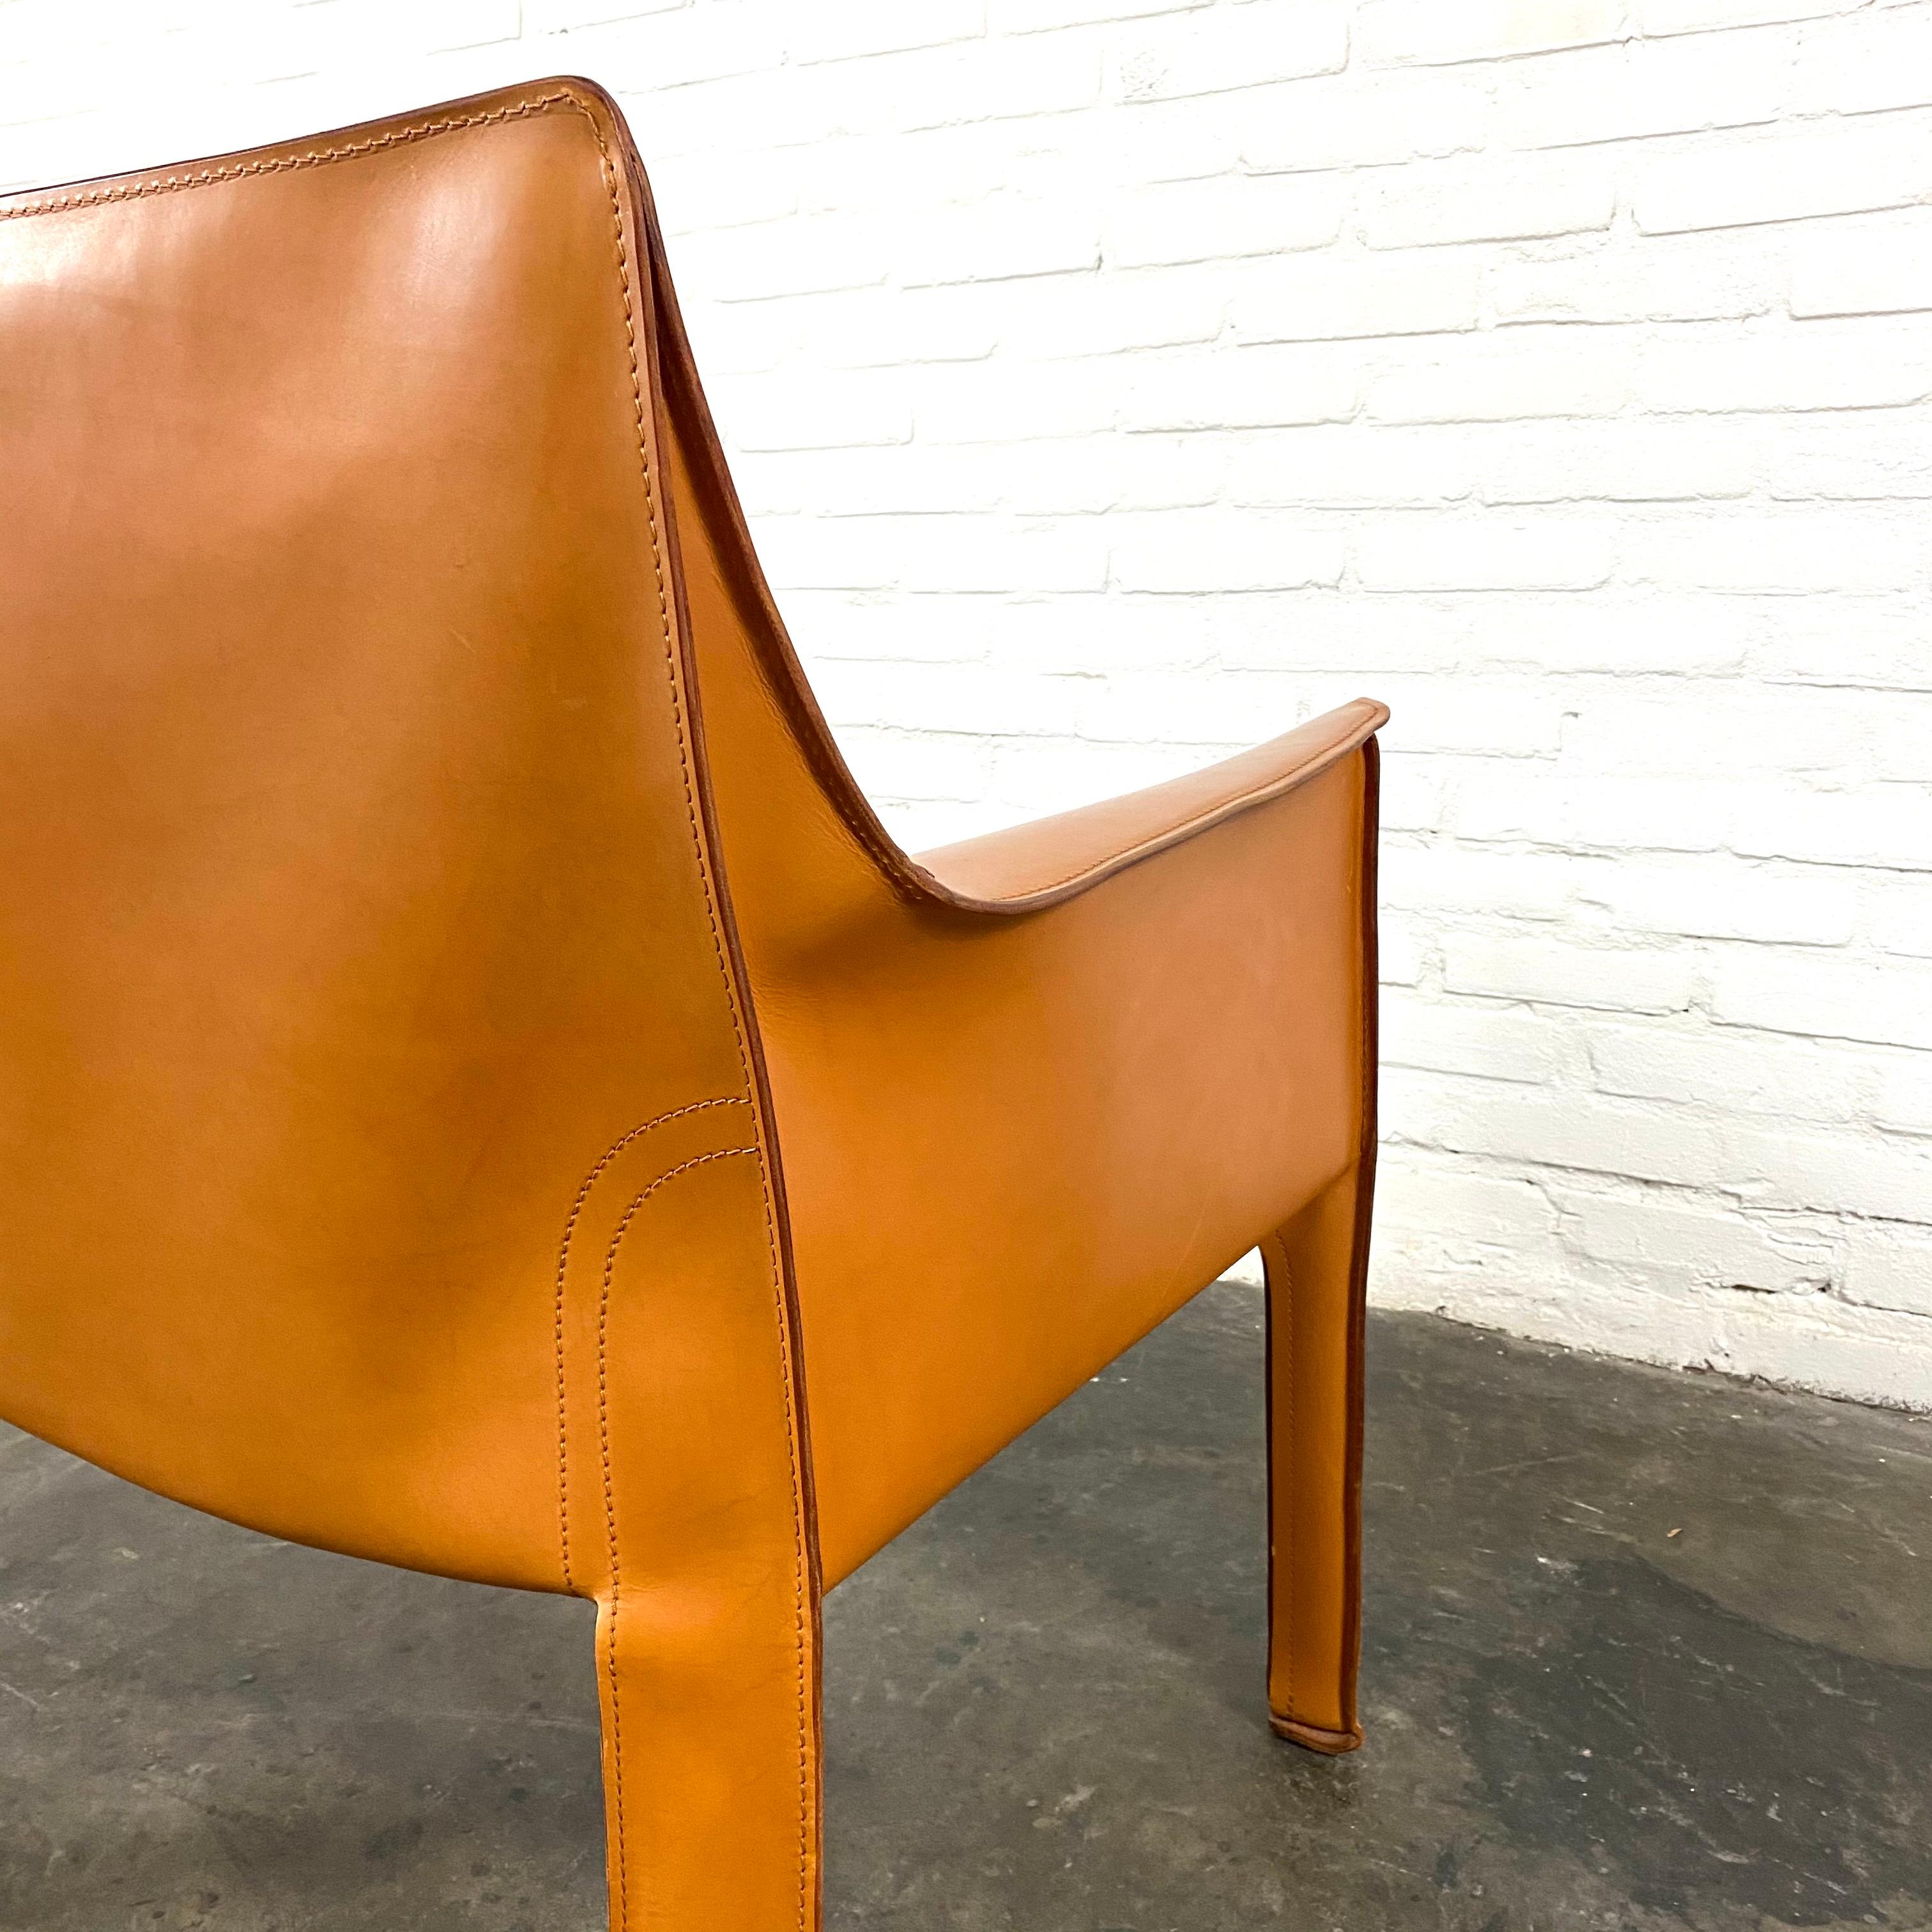 Vintage Italian Cab 414 Cognac Leather Chair by Mario Bellini for Cassina, 1970  6